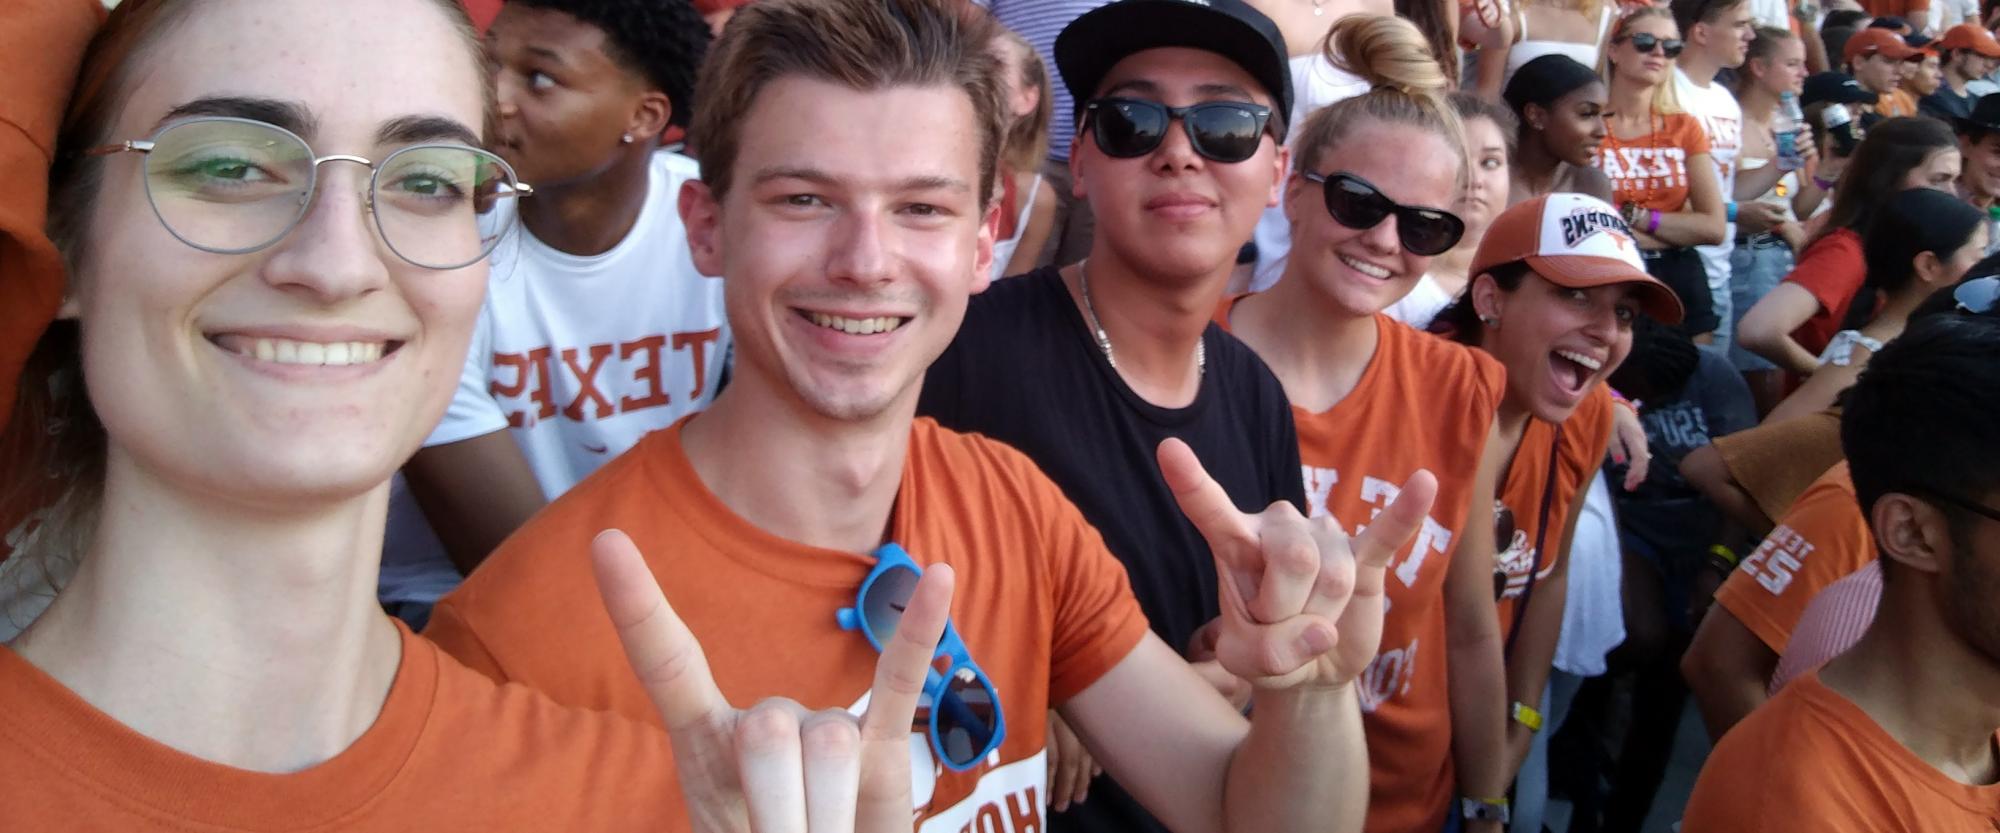 chris hahn poses with friends at a football game